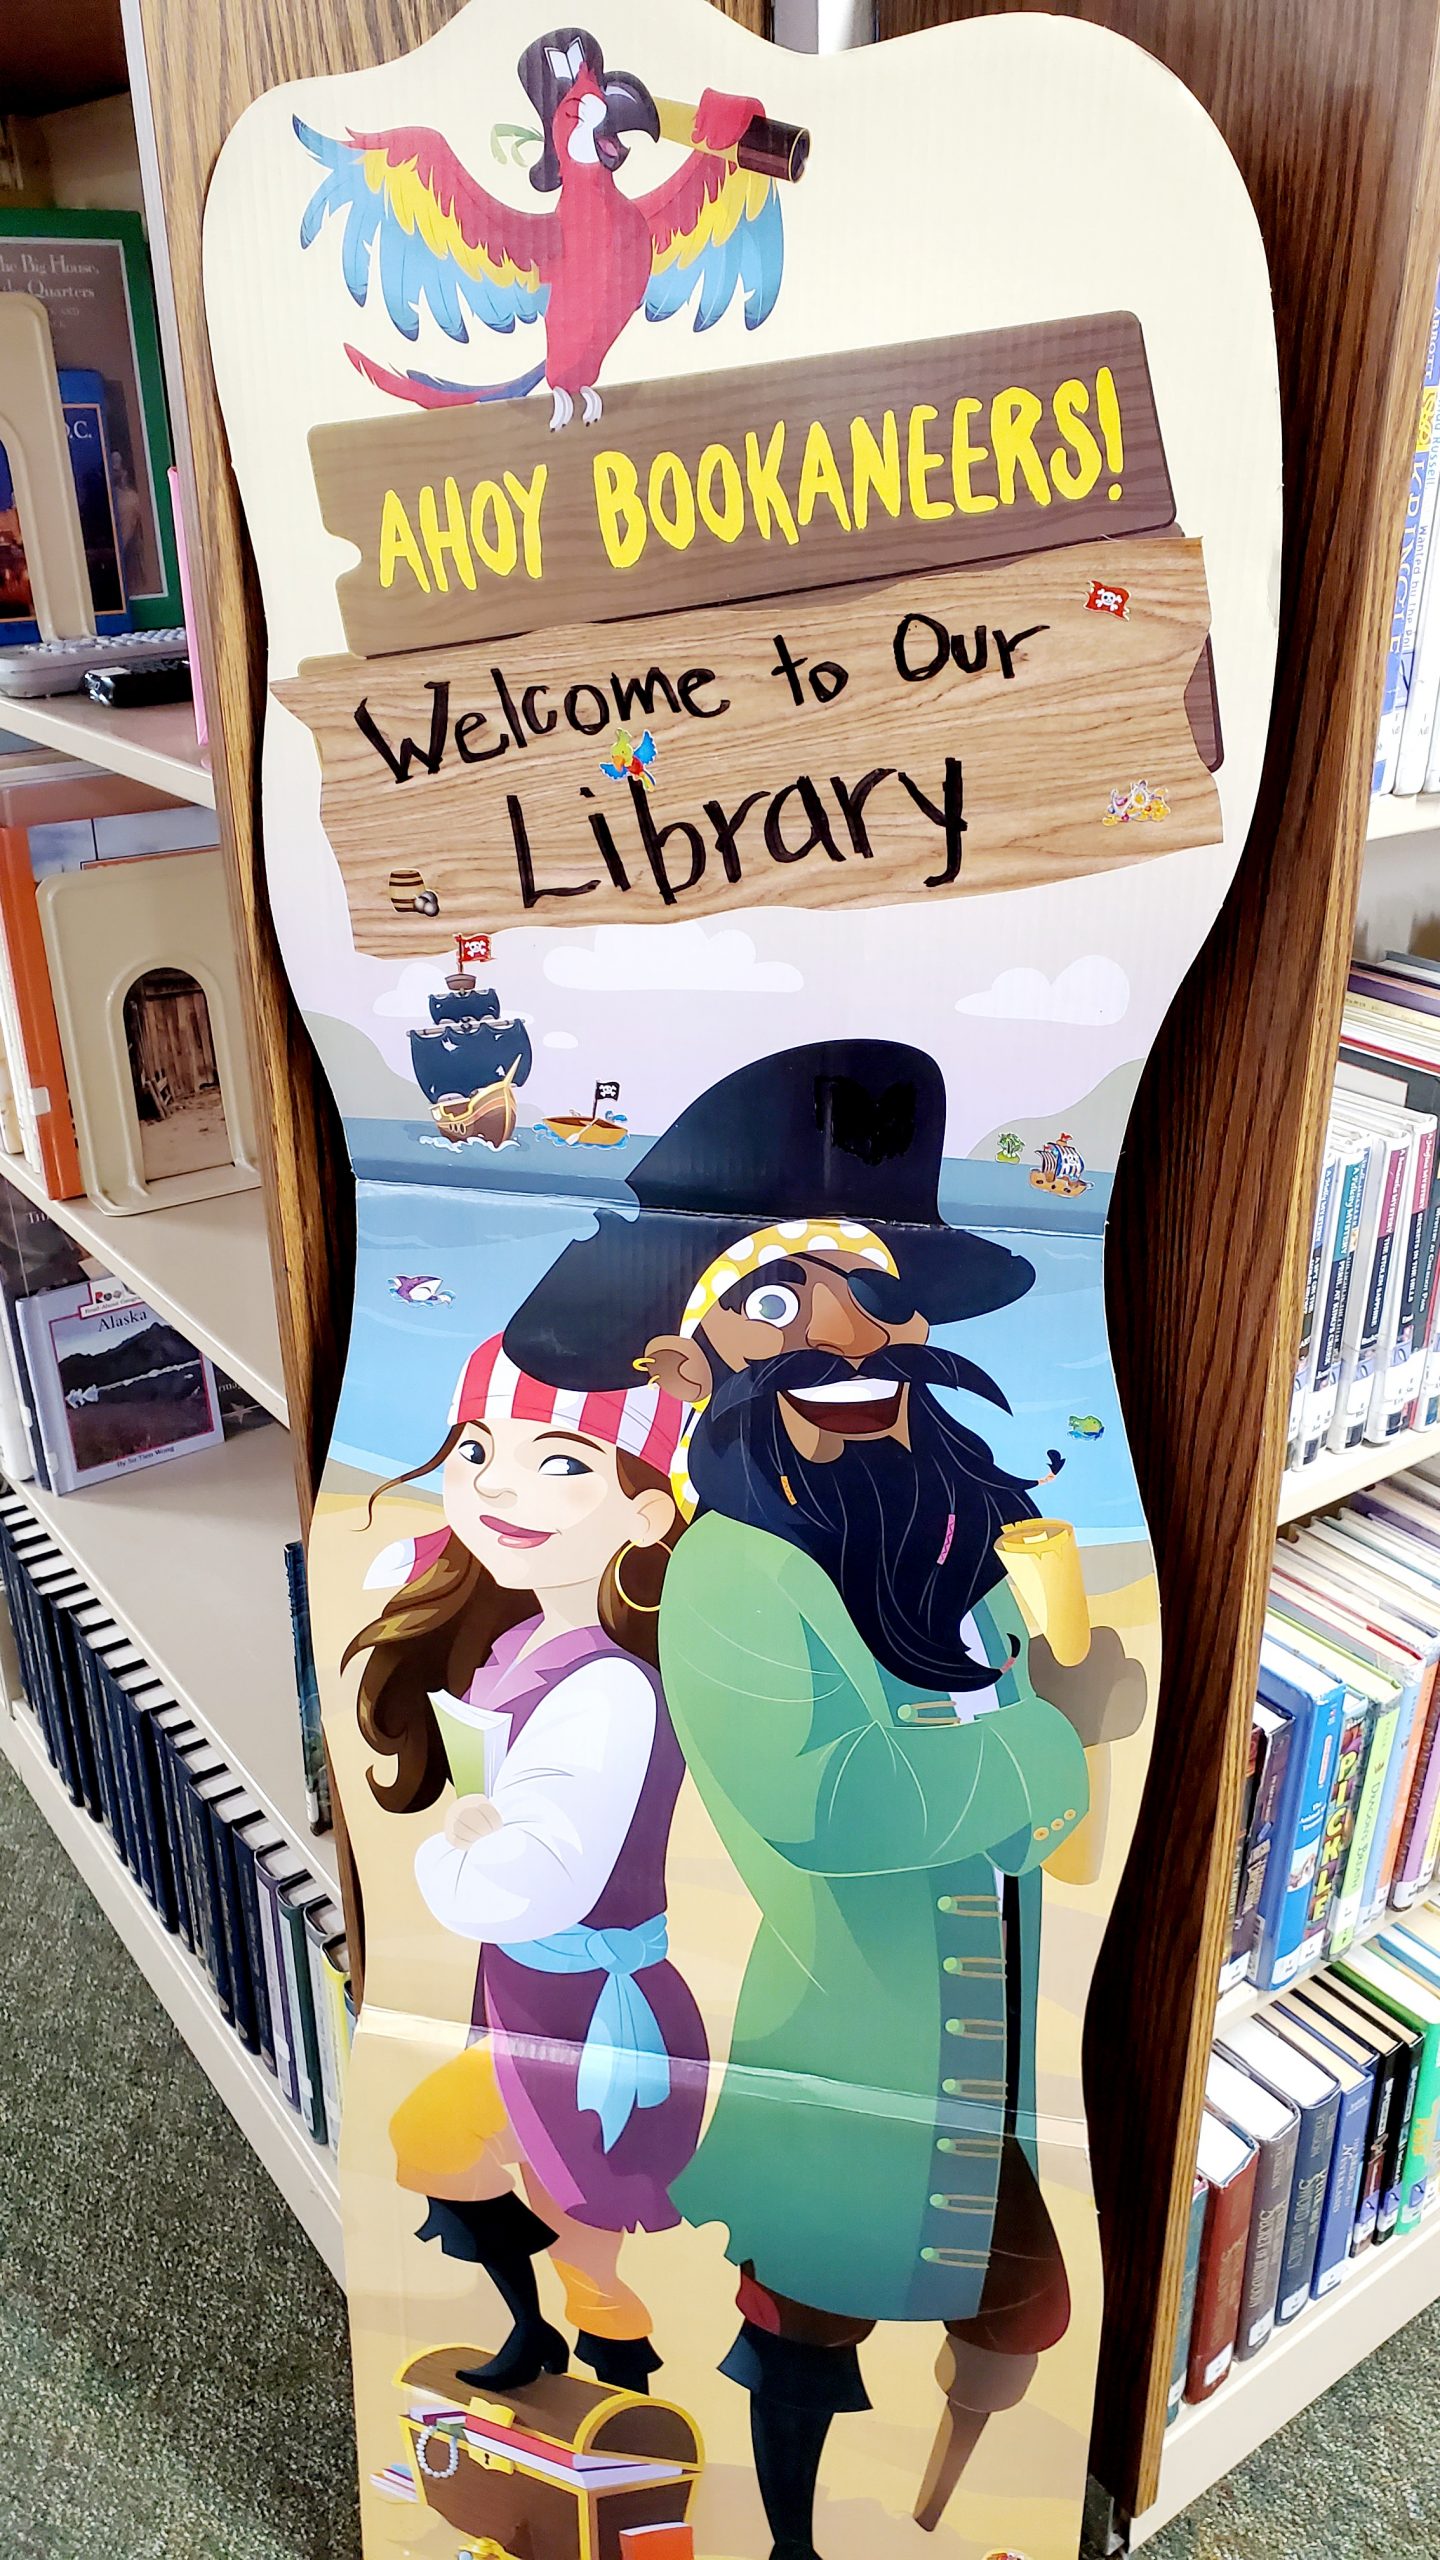 ahoy bookaneers welcome to our library poster